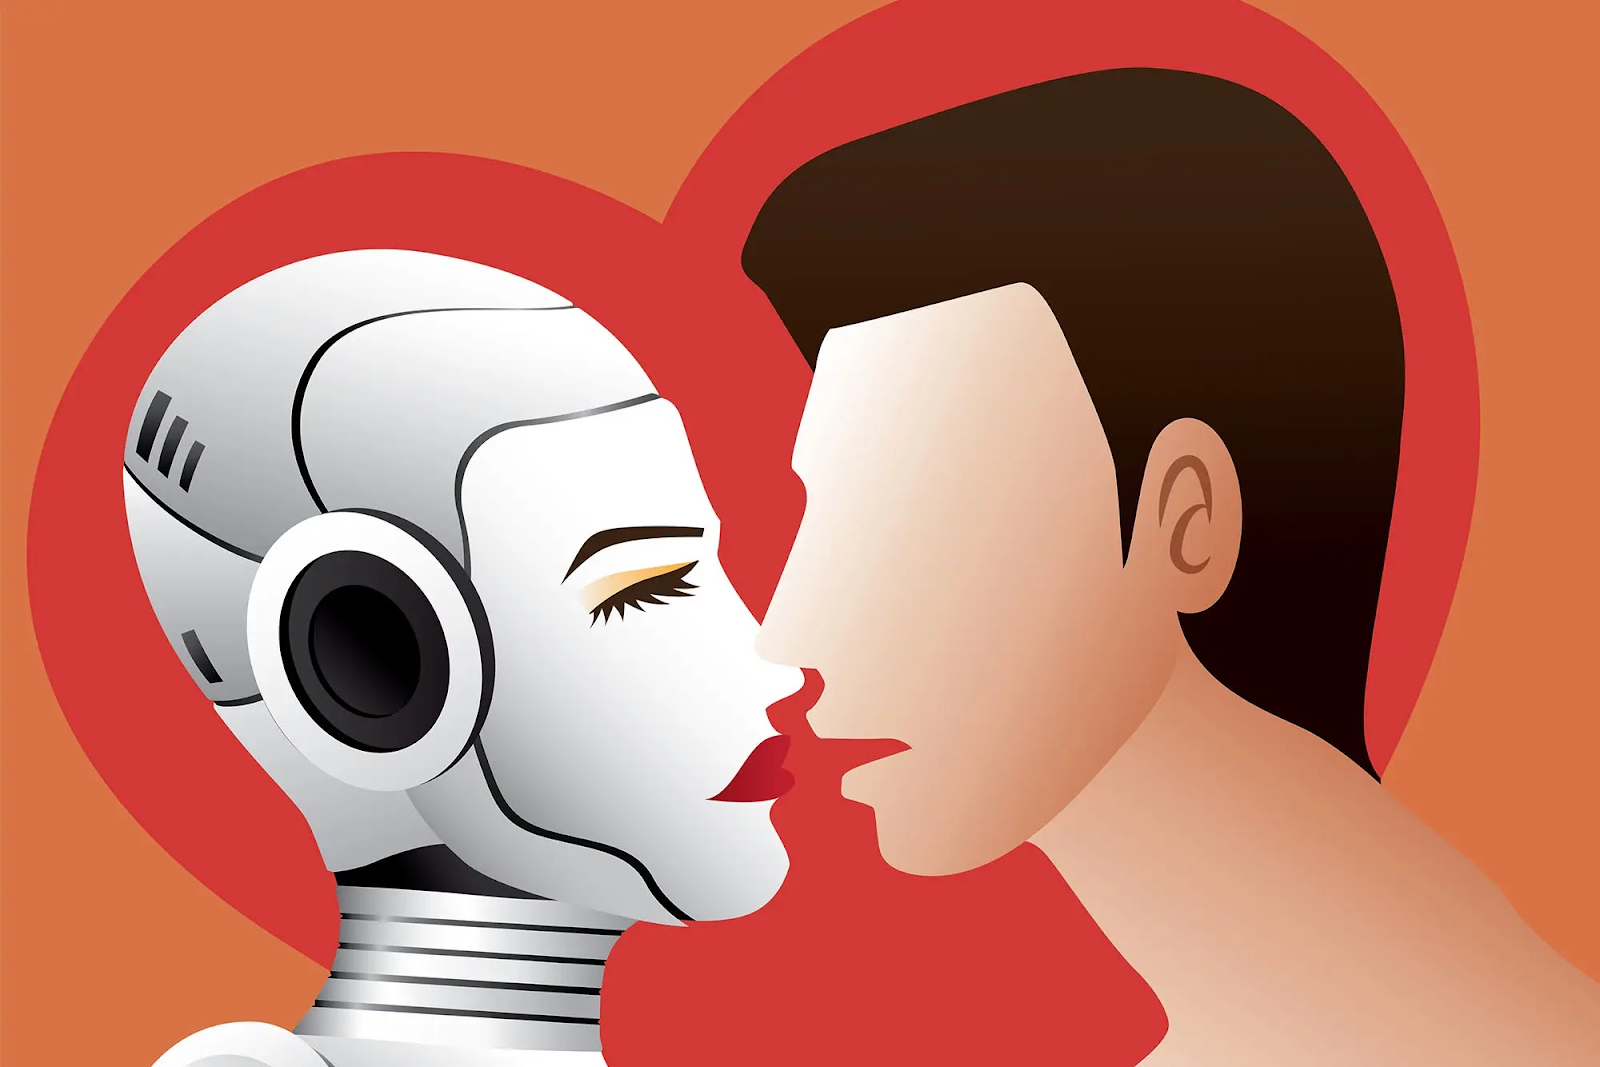 An illustration of a robot and man kissing